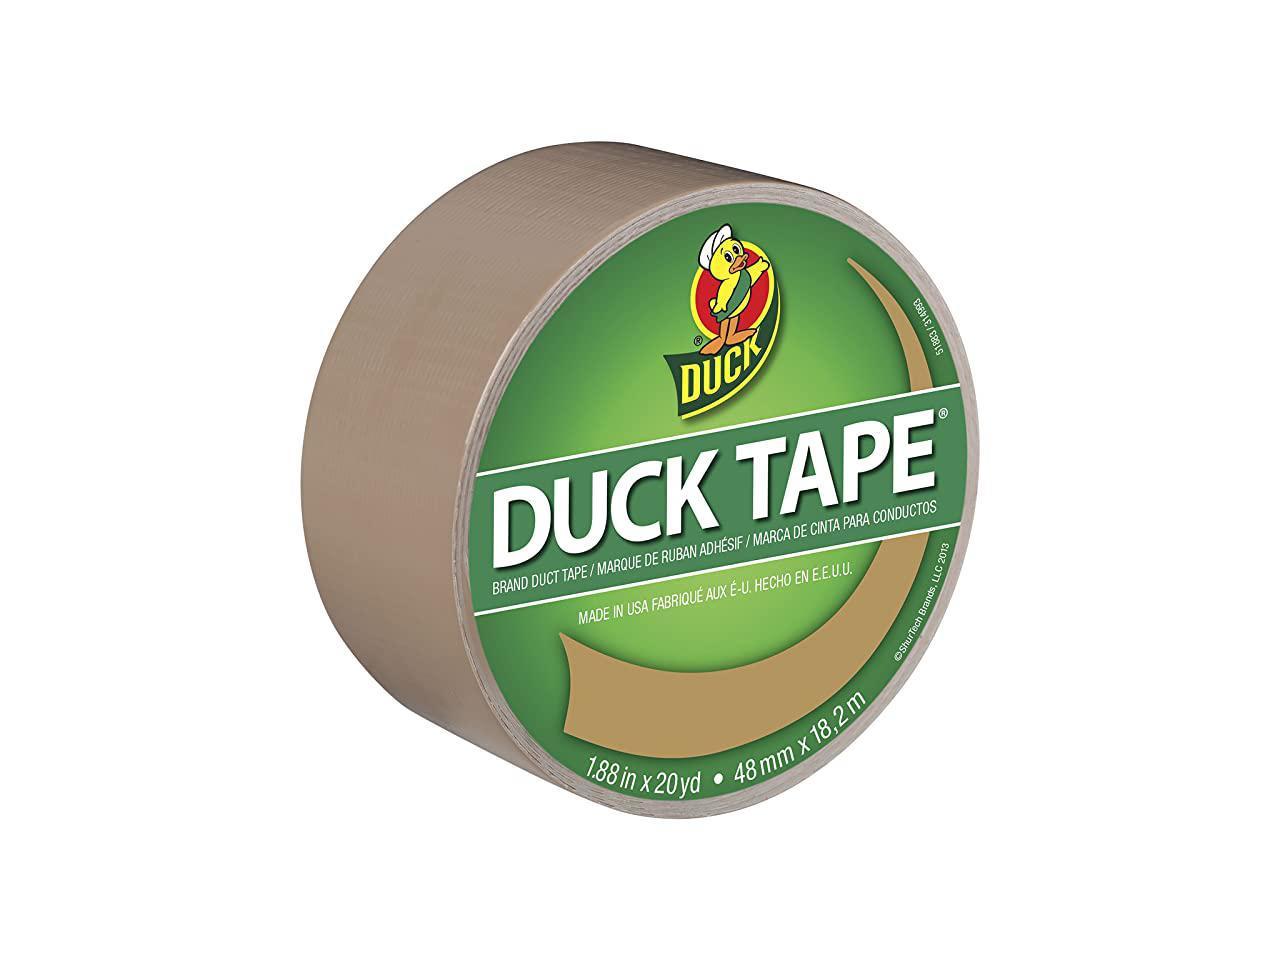 3.5" X 3.5" X 2" Multicolor Duck Brand 241792 Duct Tape 